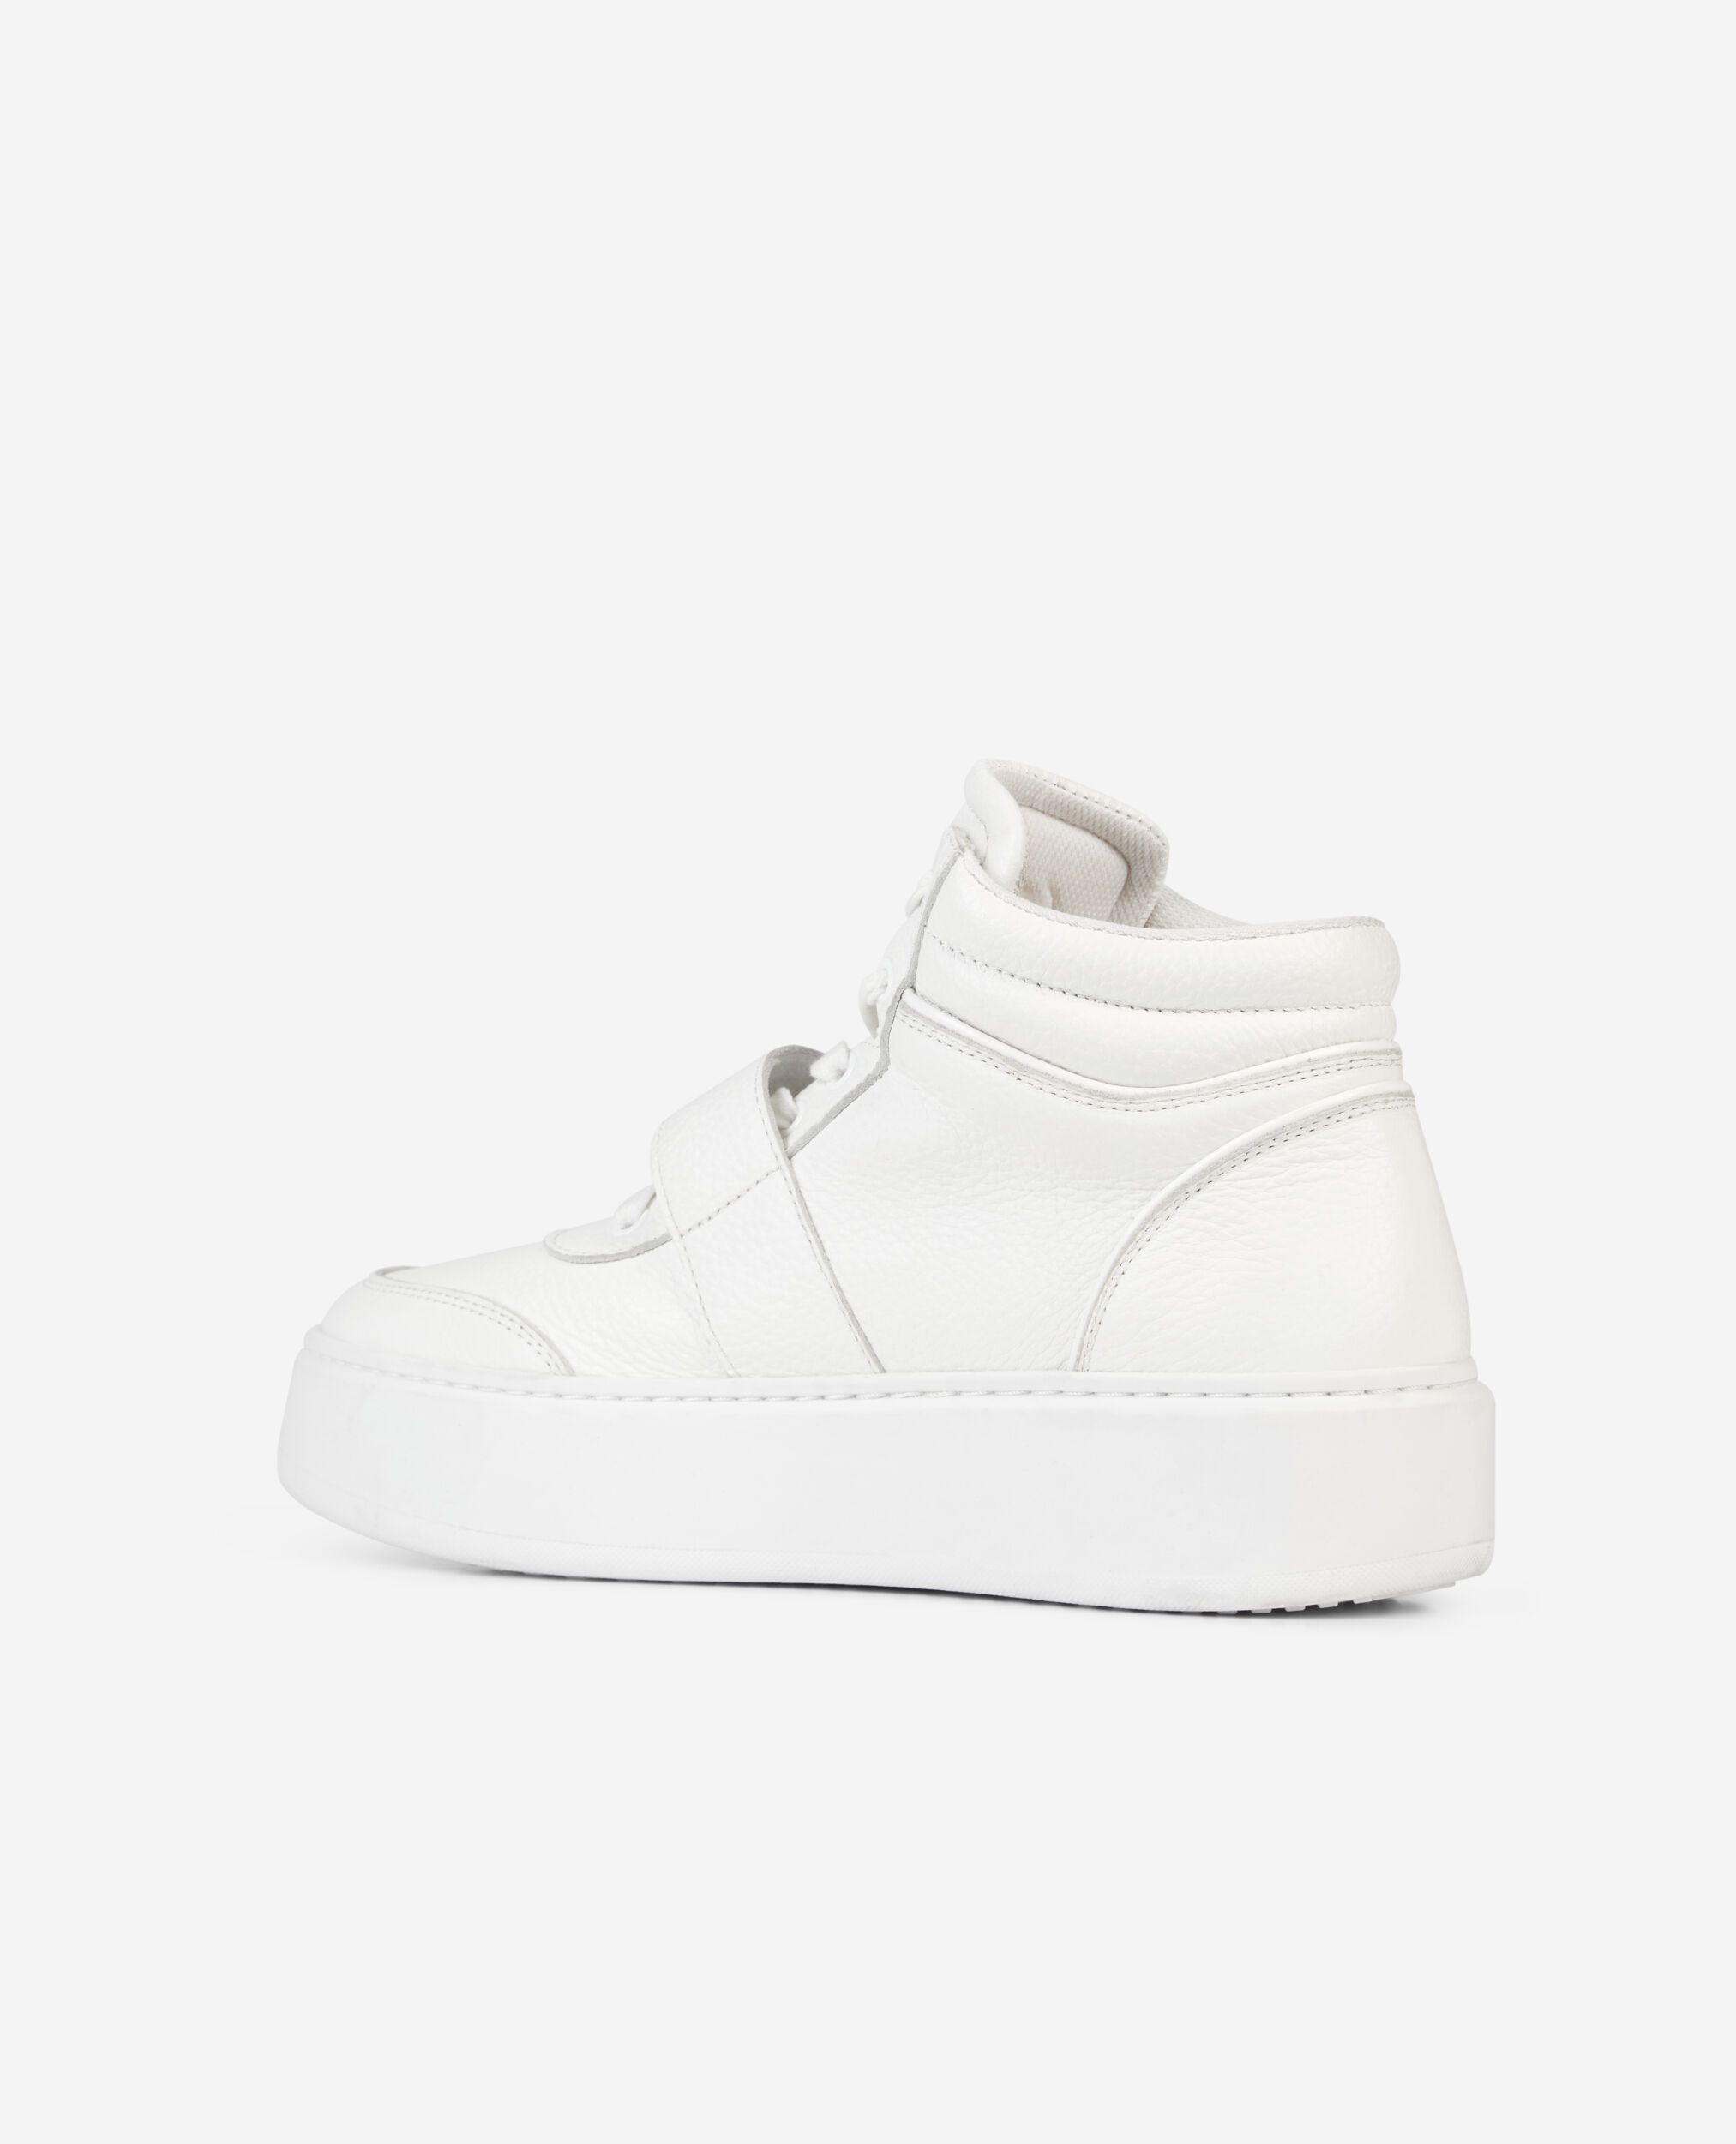 White leather high top sneakers, WHITE, hi-res image number null